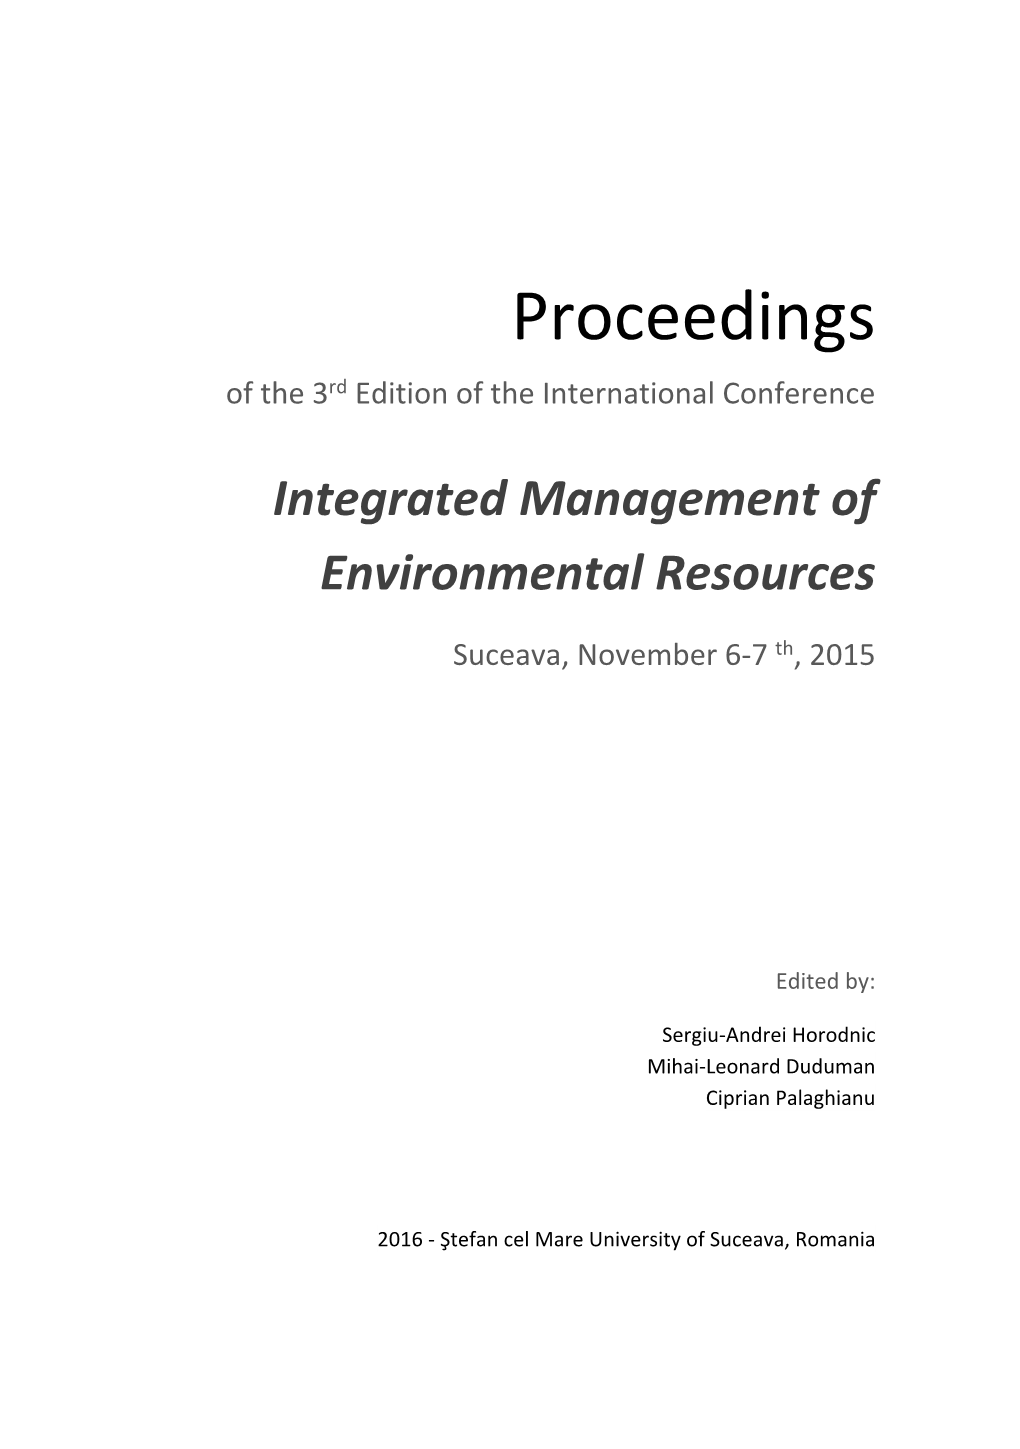 Integrated Management of Environmental Resources